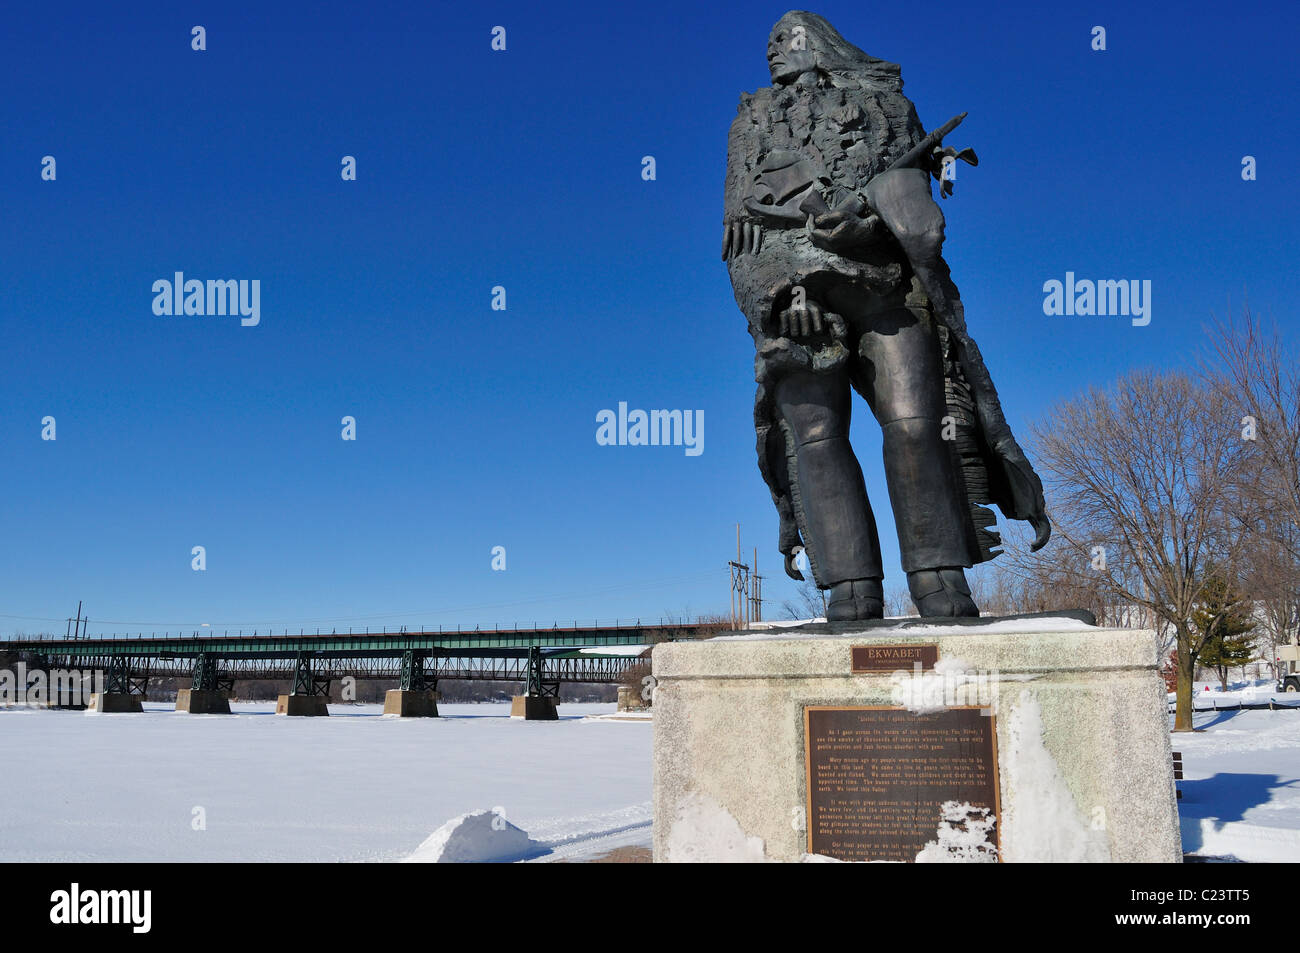 Native American, 'Ekwabet' statue erected on the banks of the Fox River to watch over the waterway St. Charles, Illinois, USA. Stock Photo